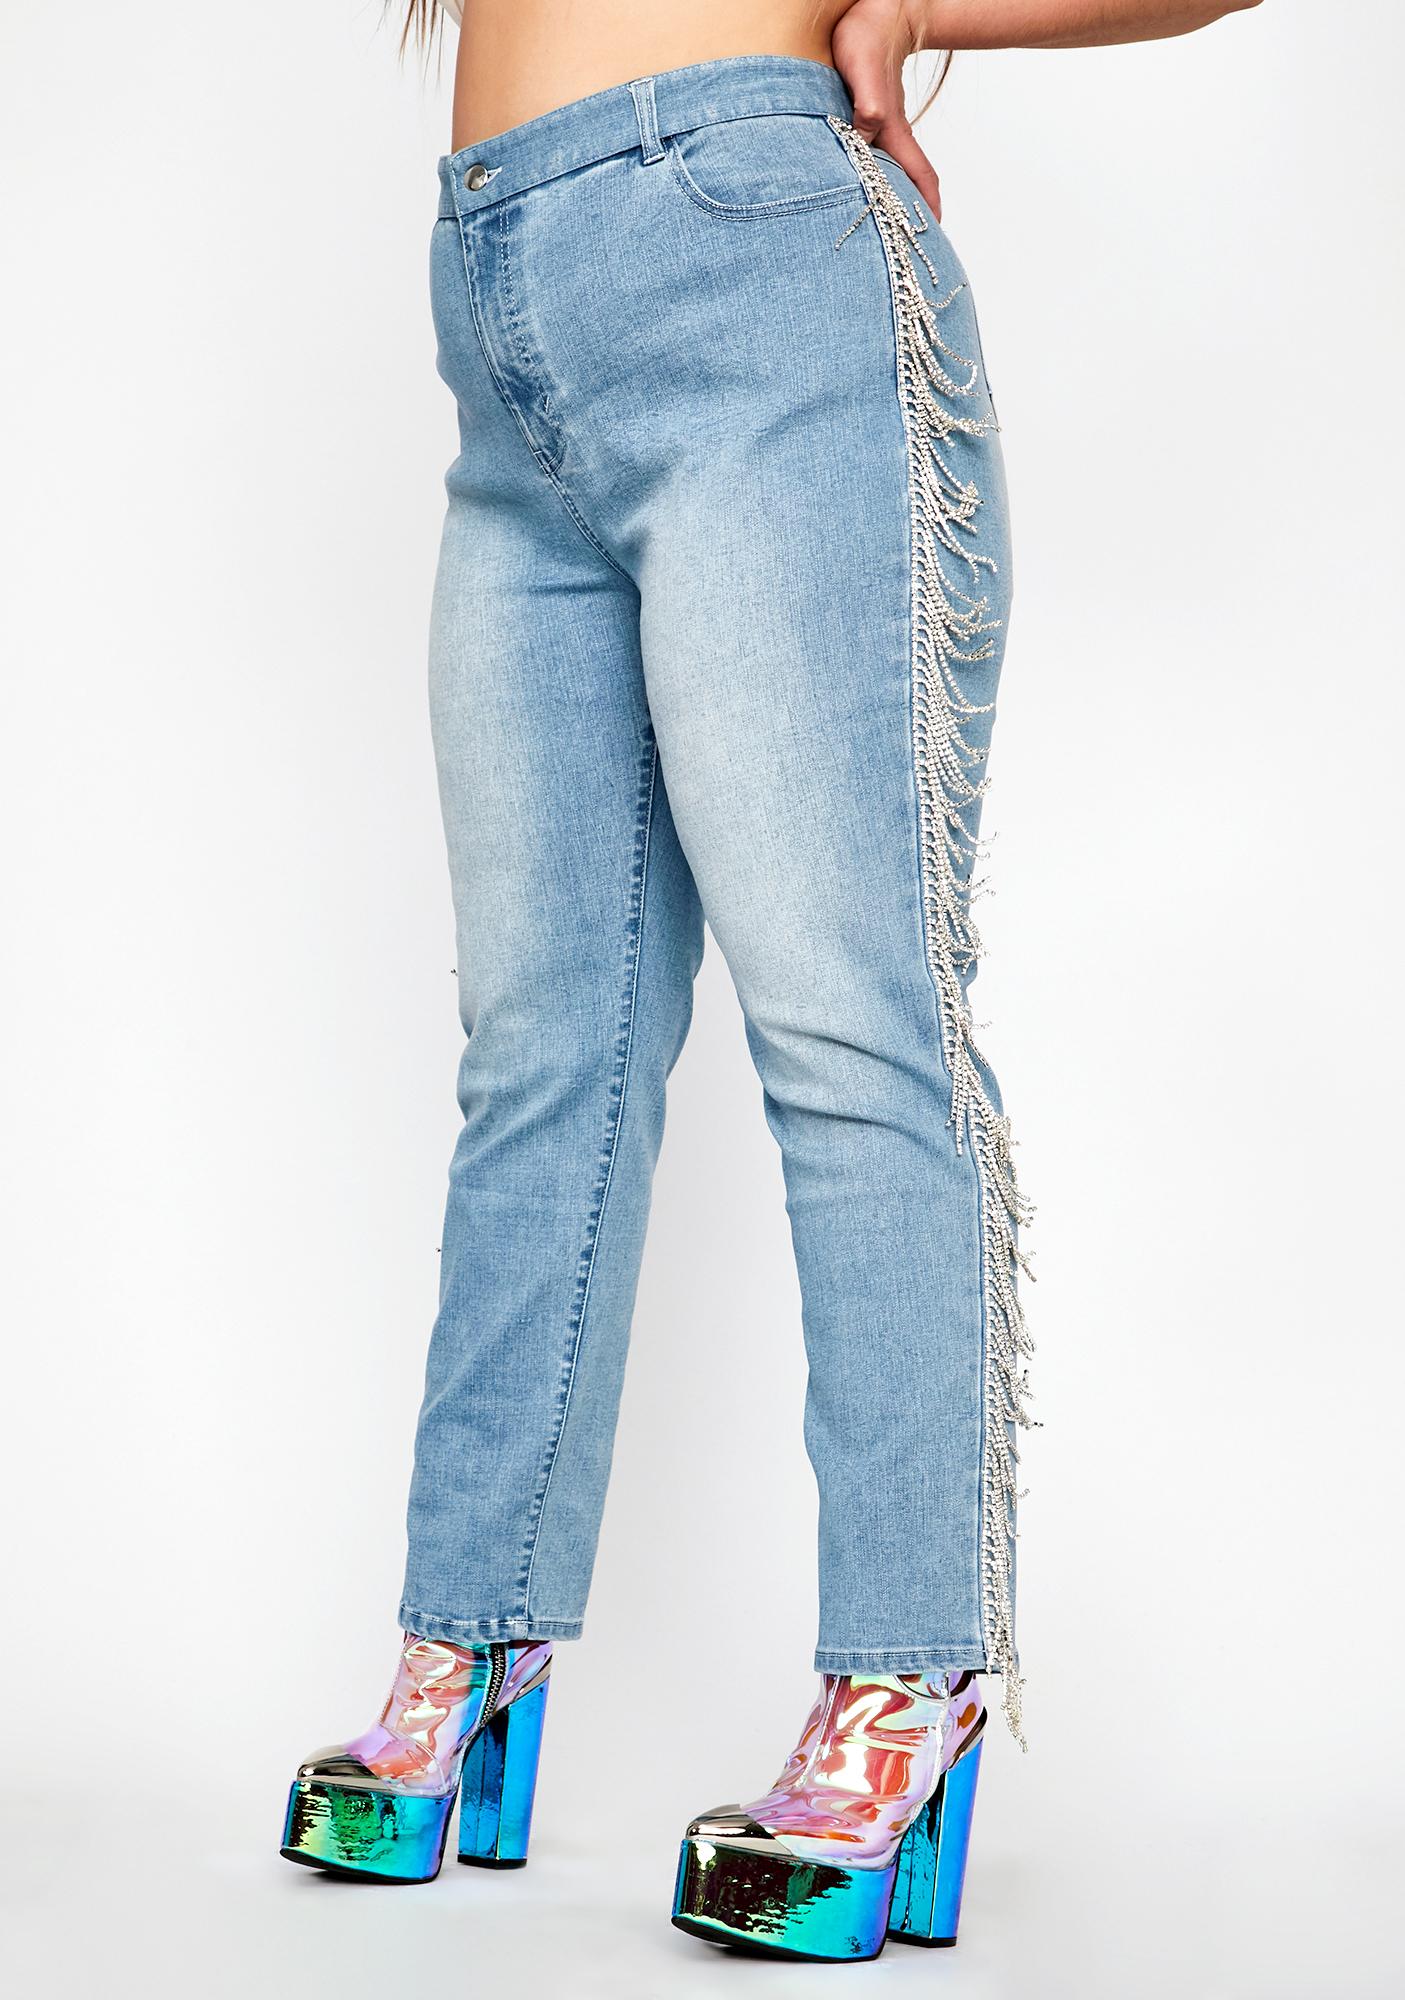 jeans with hanging rhinestones